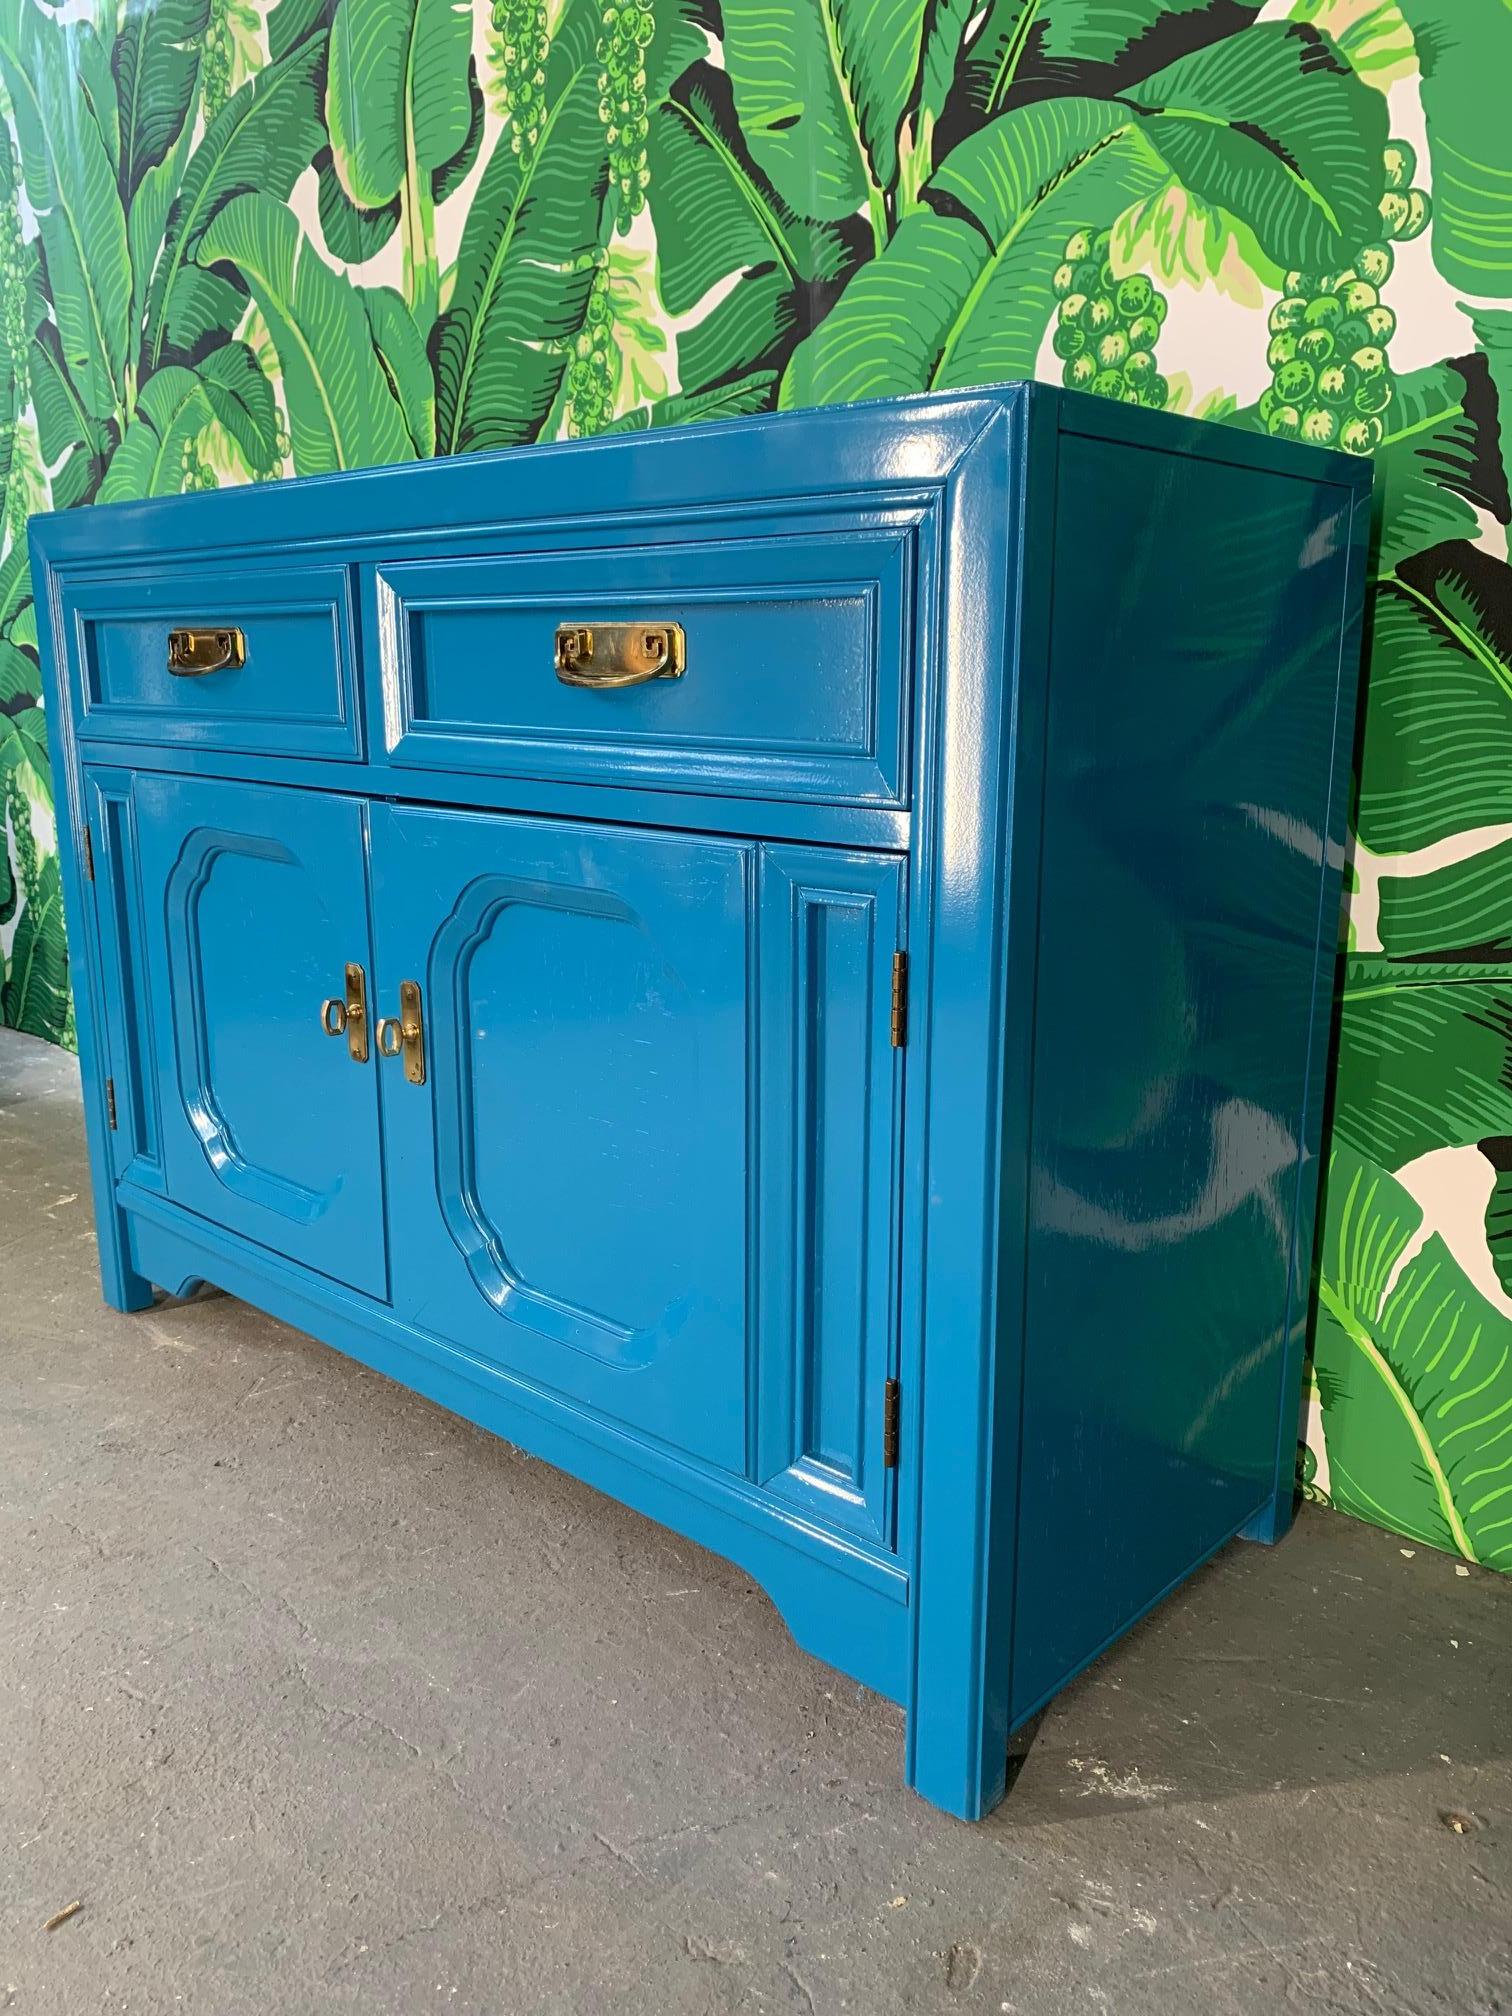 Thomasville buffet finished in high gloss blue. Original brass hardware. Very good vintage condition with minor imperfections to the newly lacquered finish.